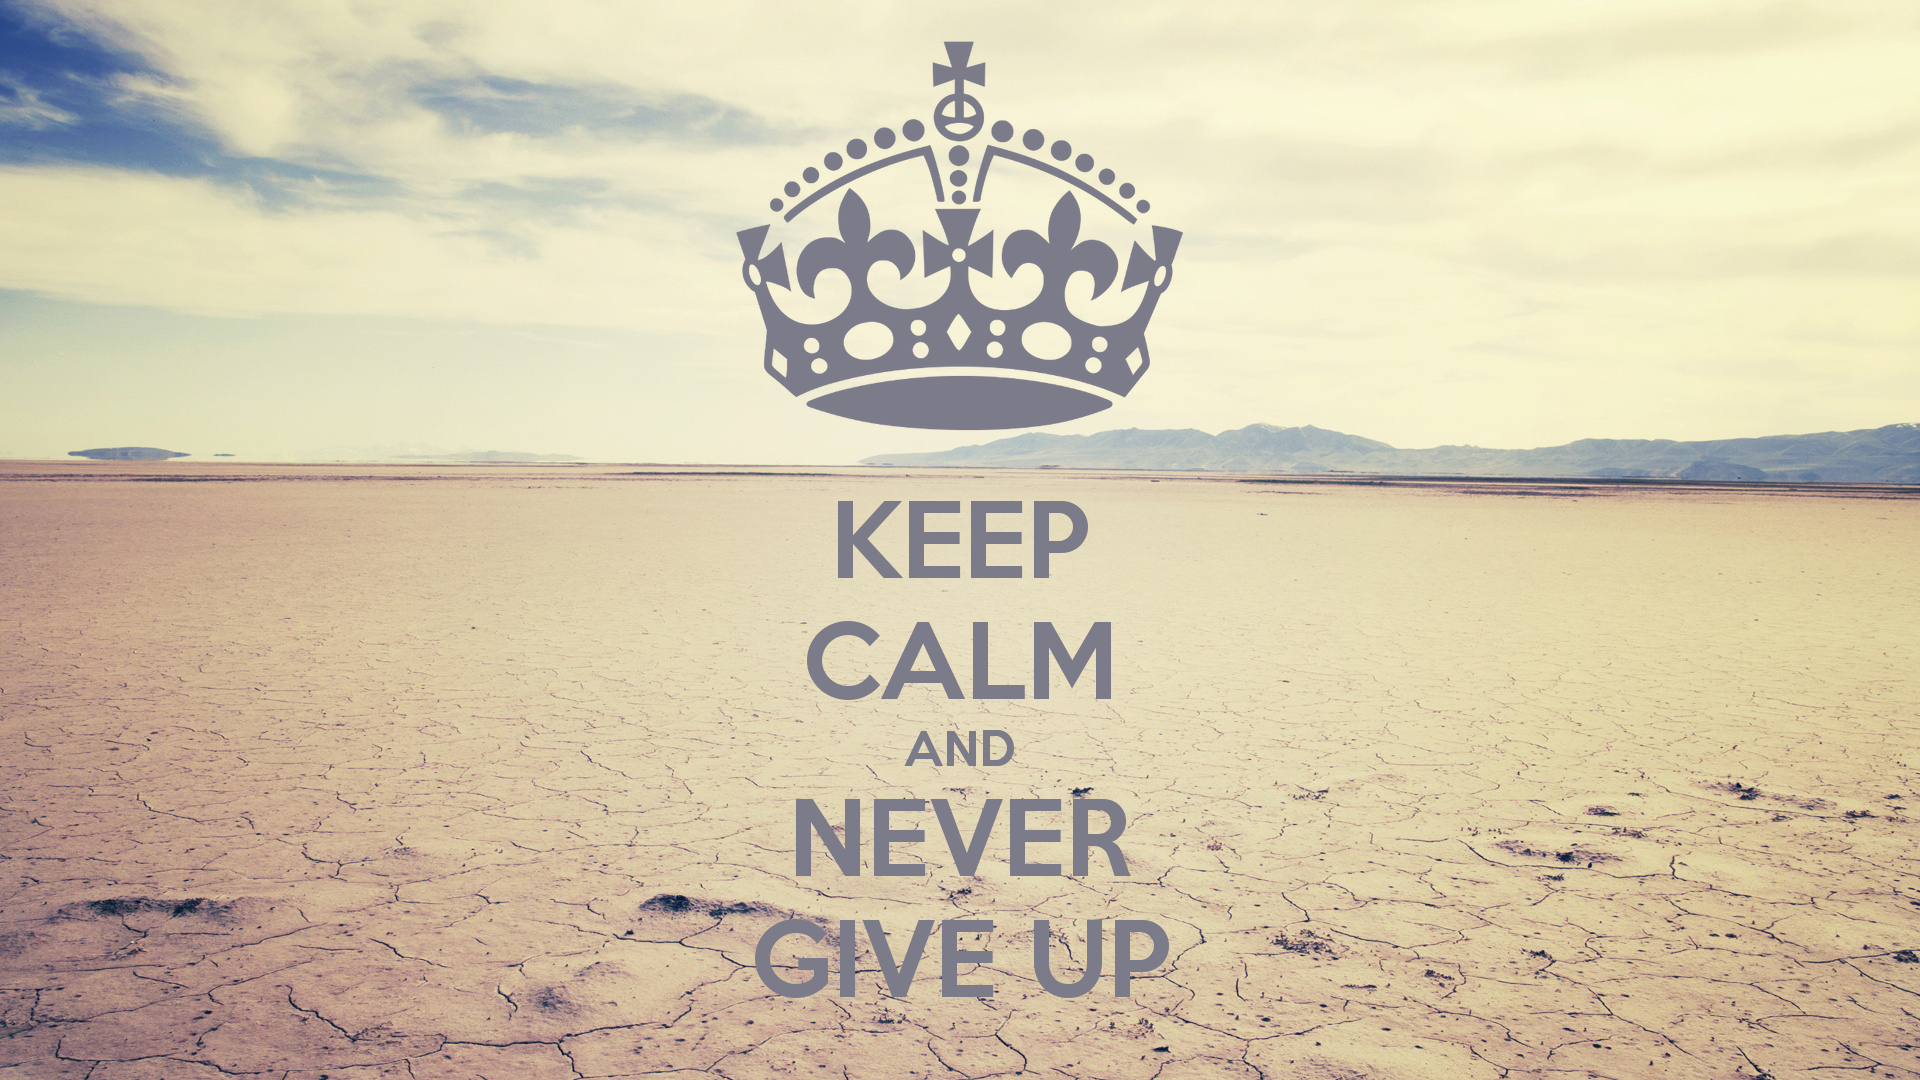 Never give up wallpaper